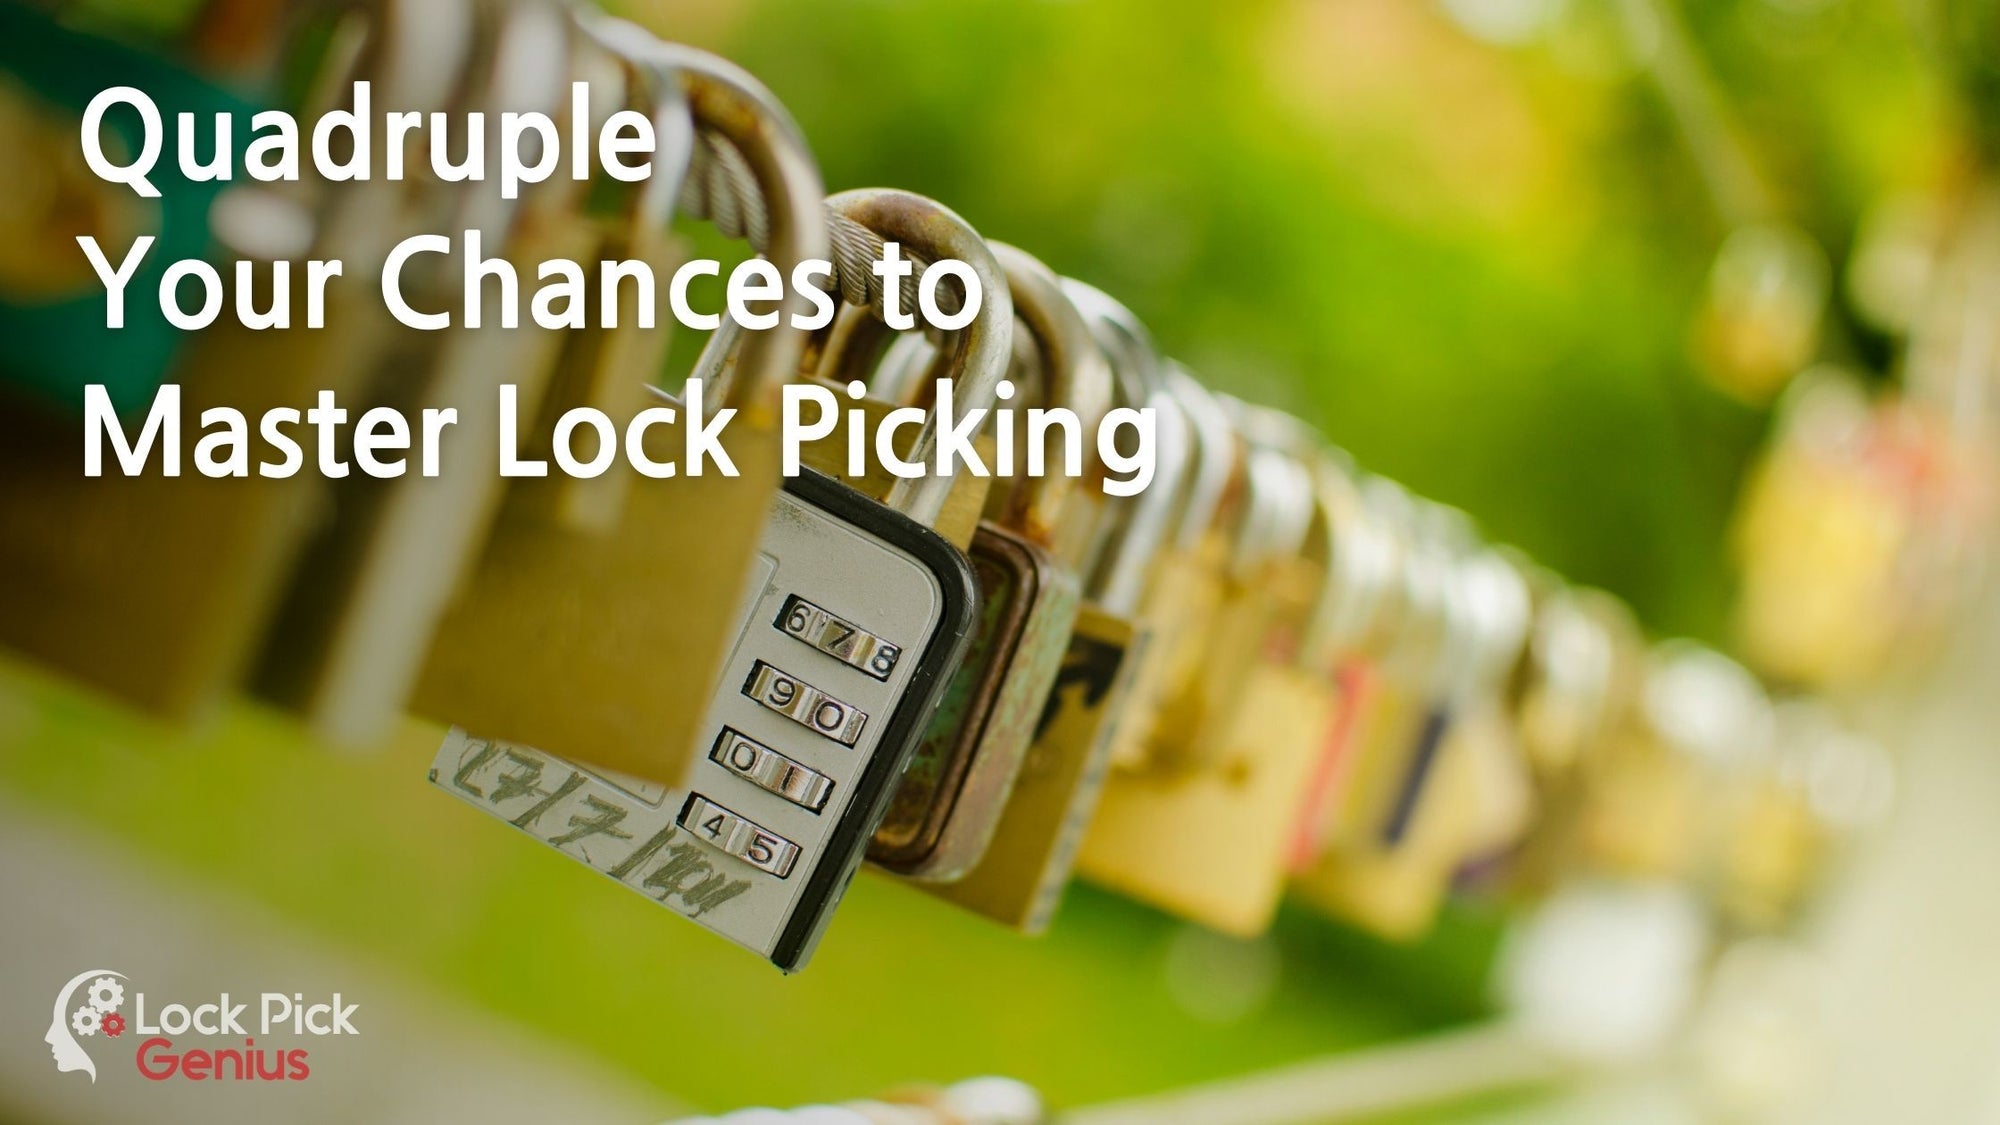 Quadruple Your Chances to Master Lock Picking or Get Your Money Back